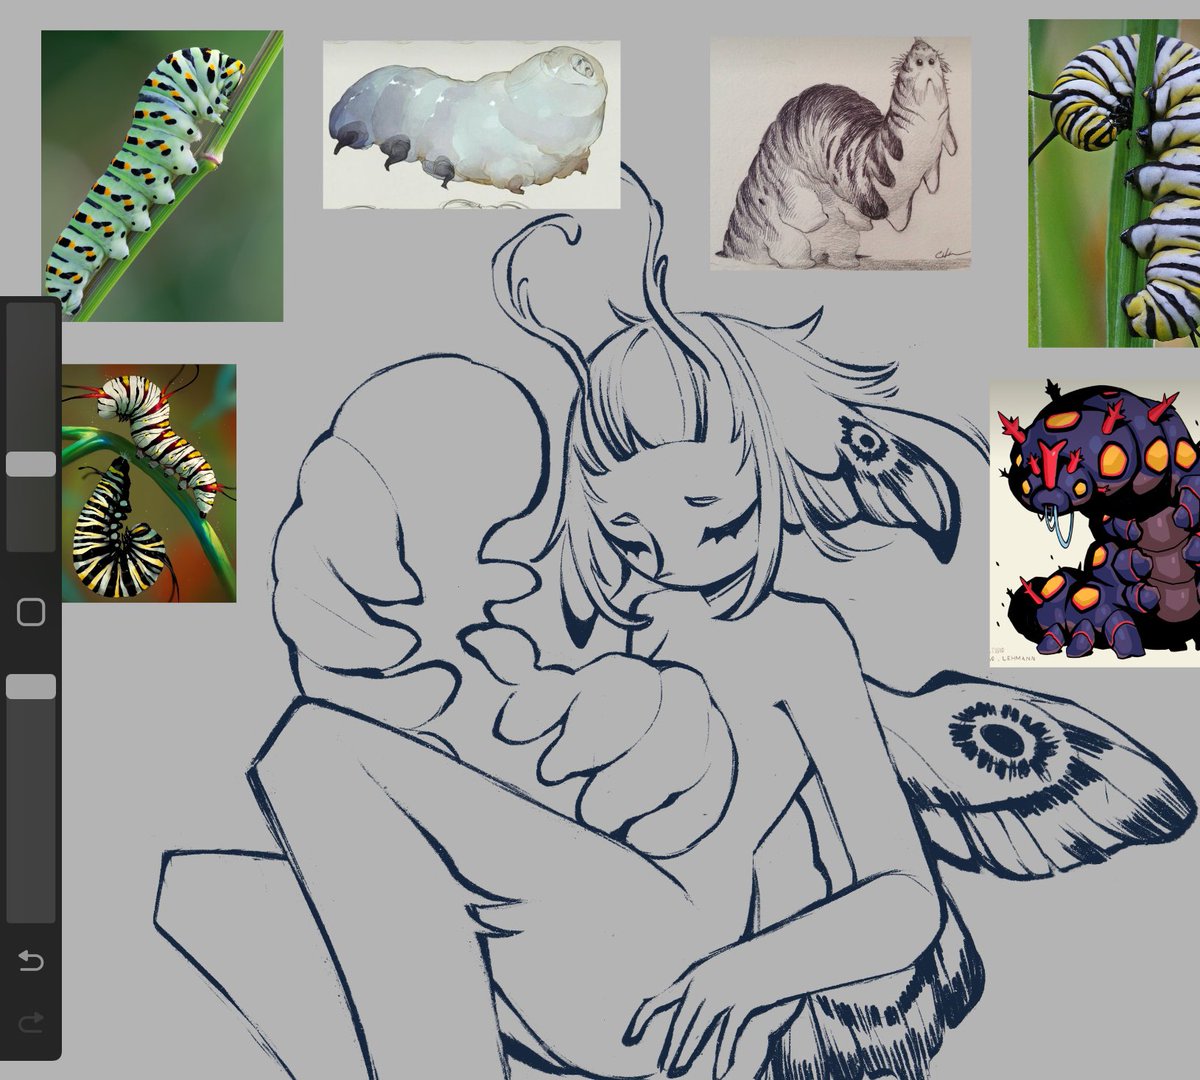 Struggling so hard to draw a caterpillar that I have to use 6 references simultaneously🫡